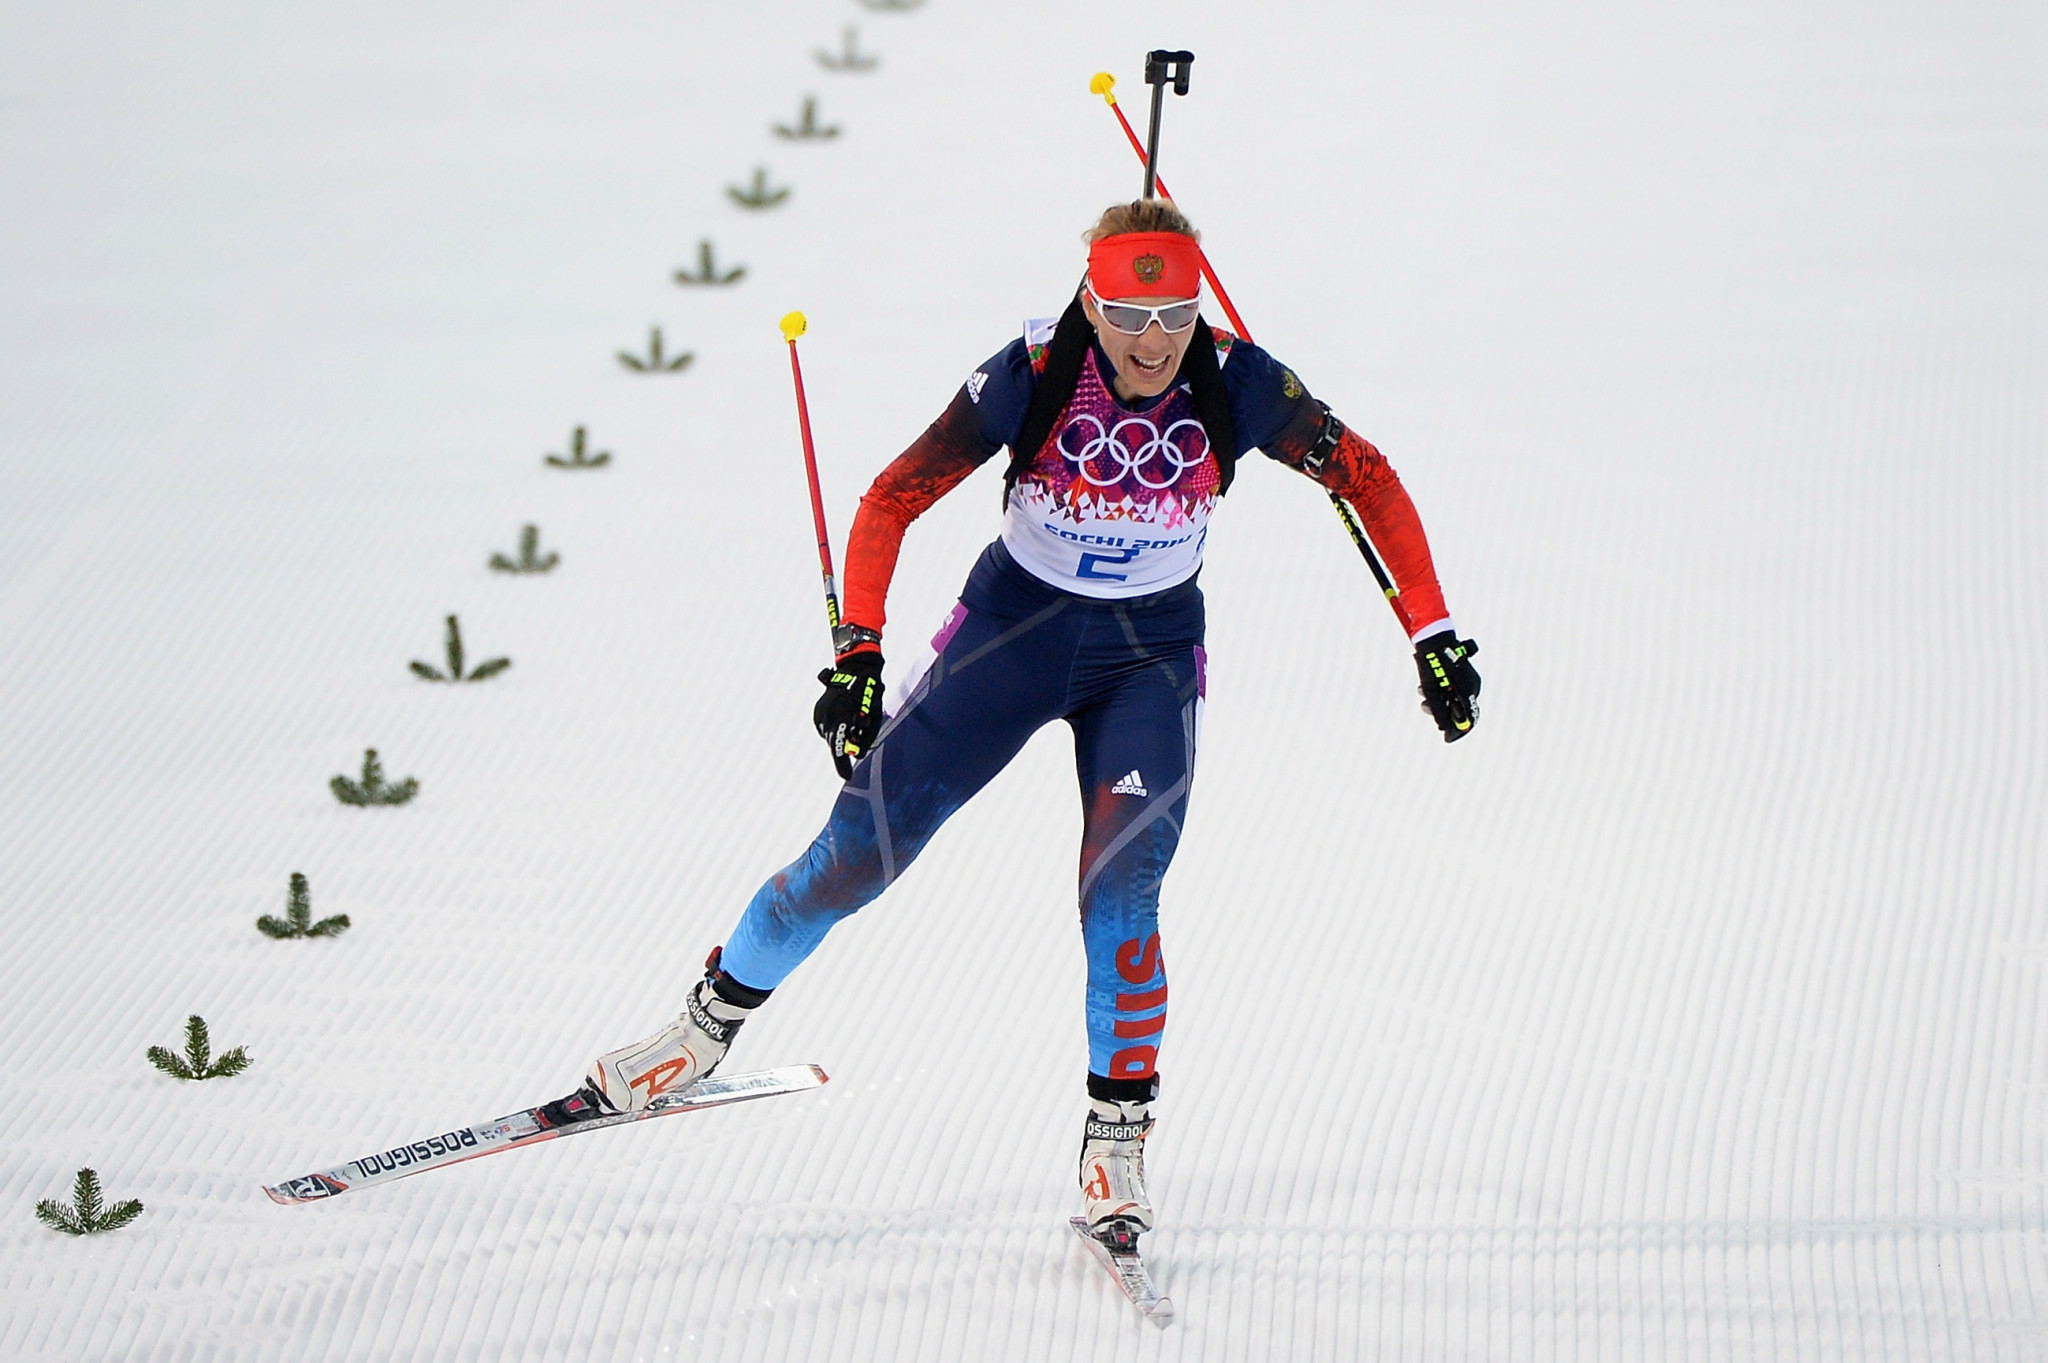 Olga Zaitseva has been nominated to sit on the Russian Biathlon Union Board ©Getty Images